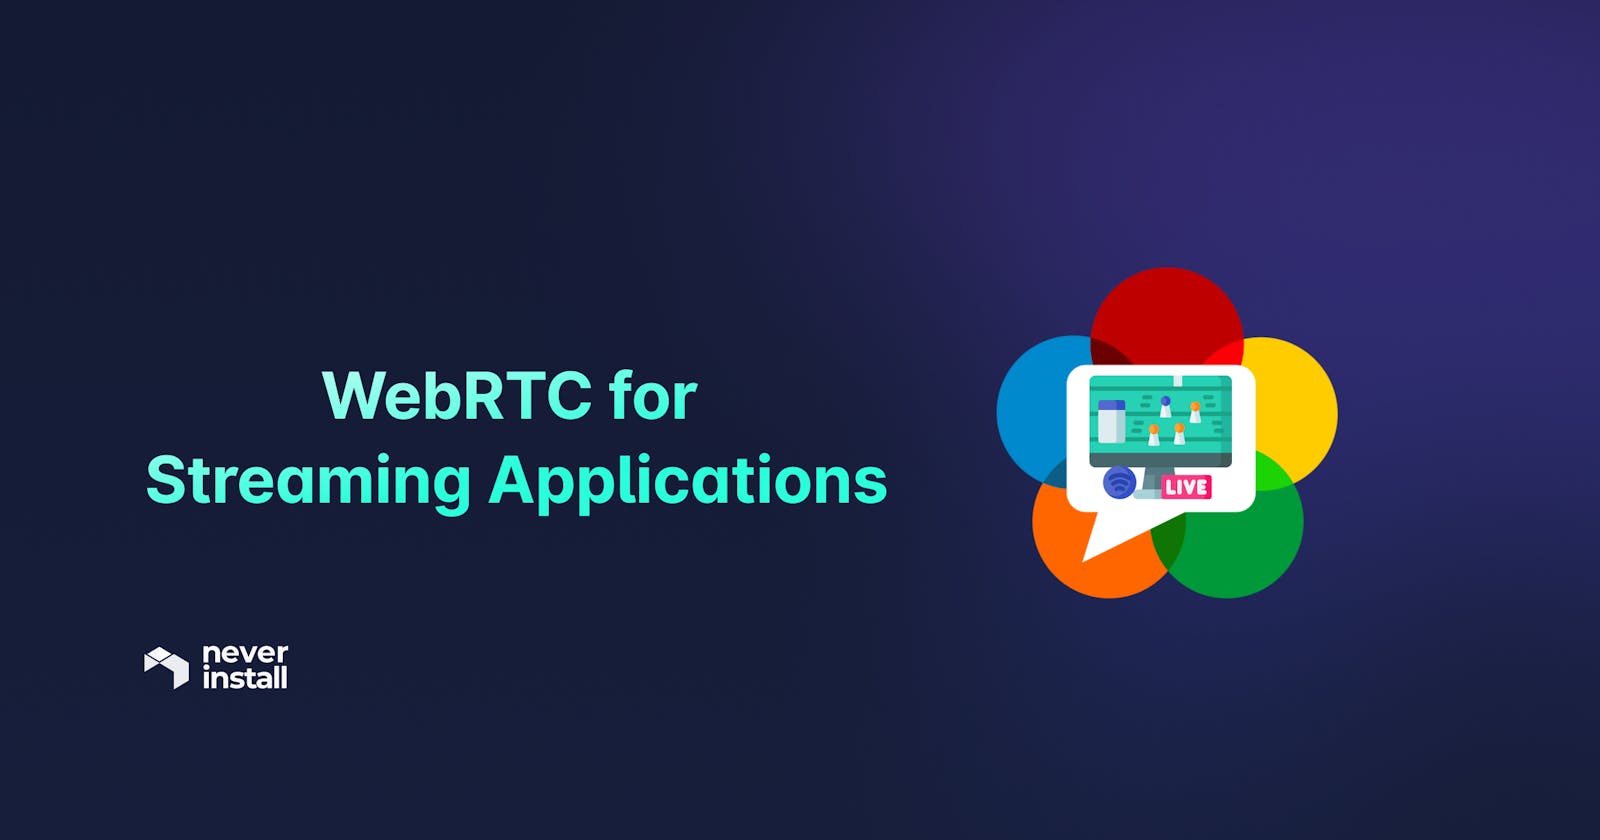 WebRTC for Streaming Applications